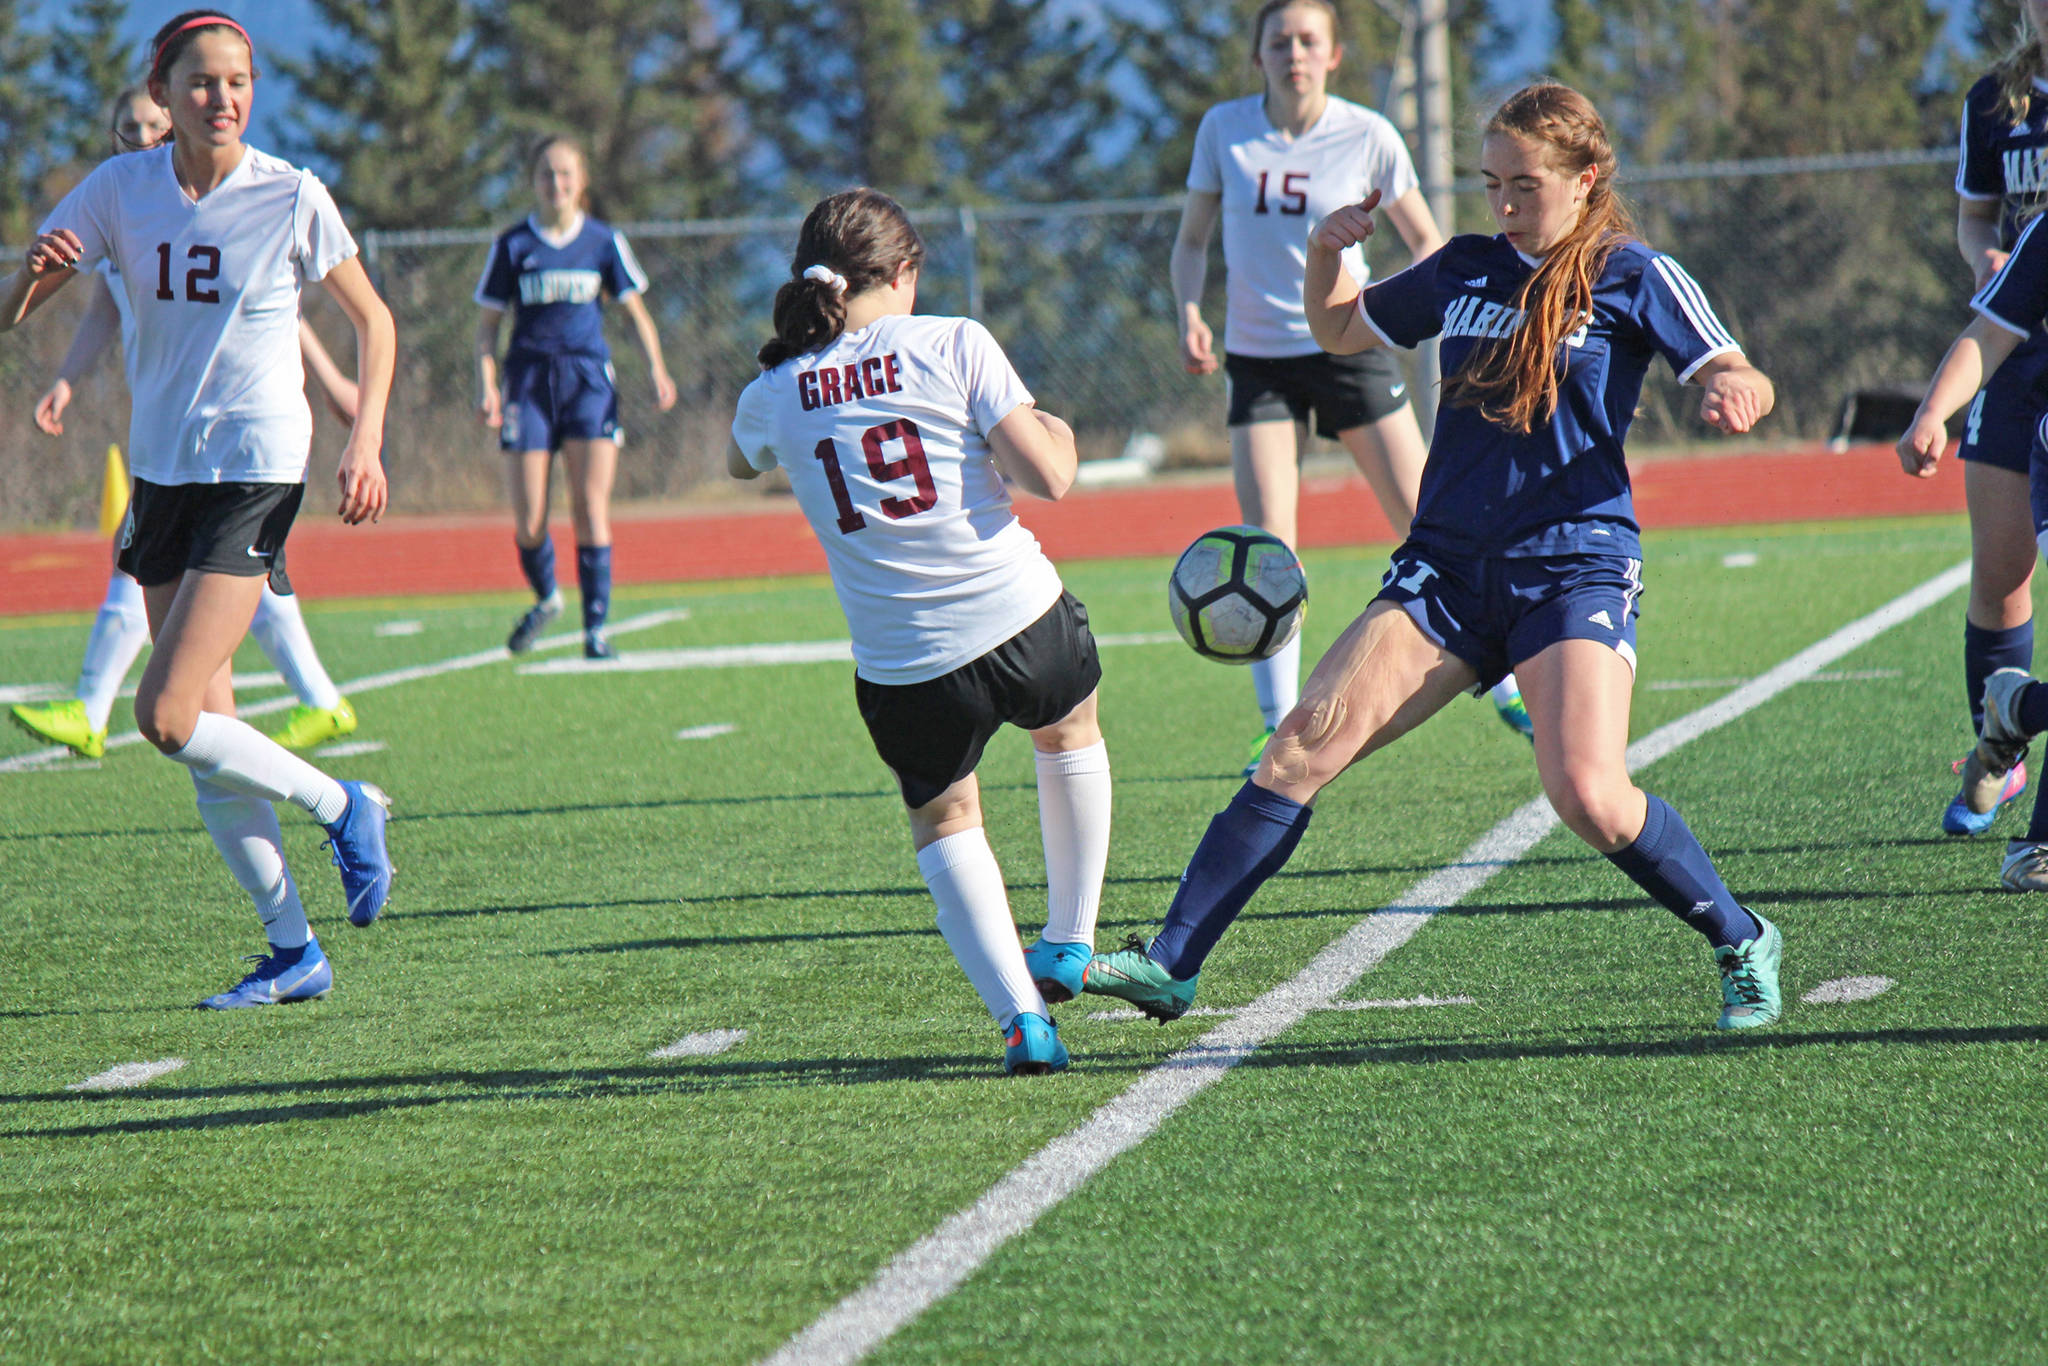 Mariner Summer McGuire has no intention of giving up control of the ball during Friday’s varsity soccer game against Grace Christian on April 26, 2019, at the high school in Homer, Alaska. (Photo by McKibben Jackinsky)